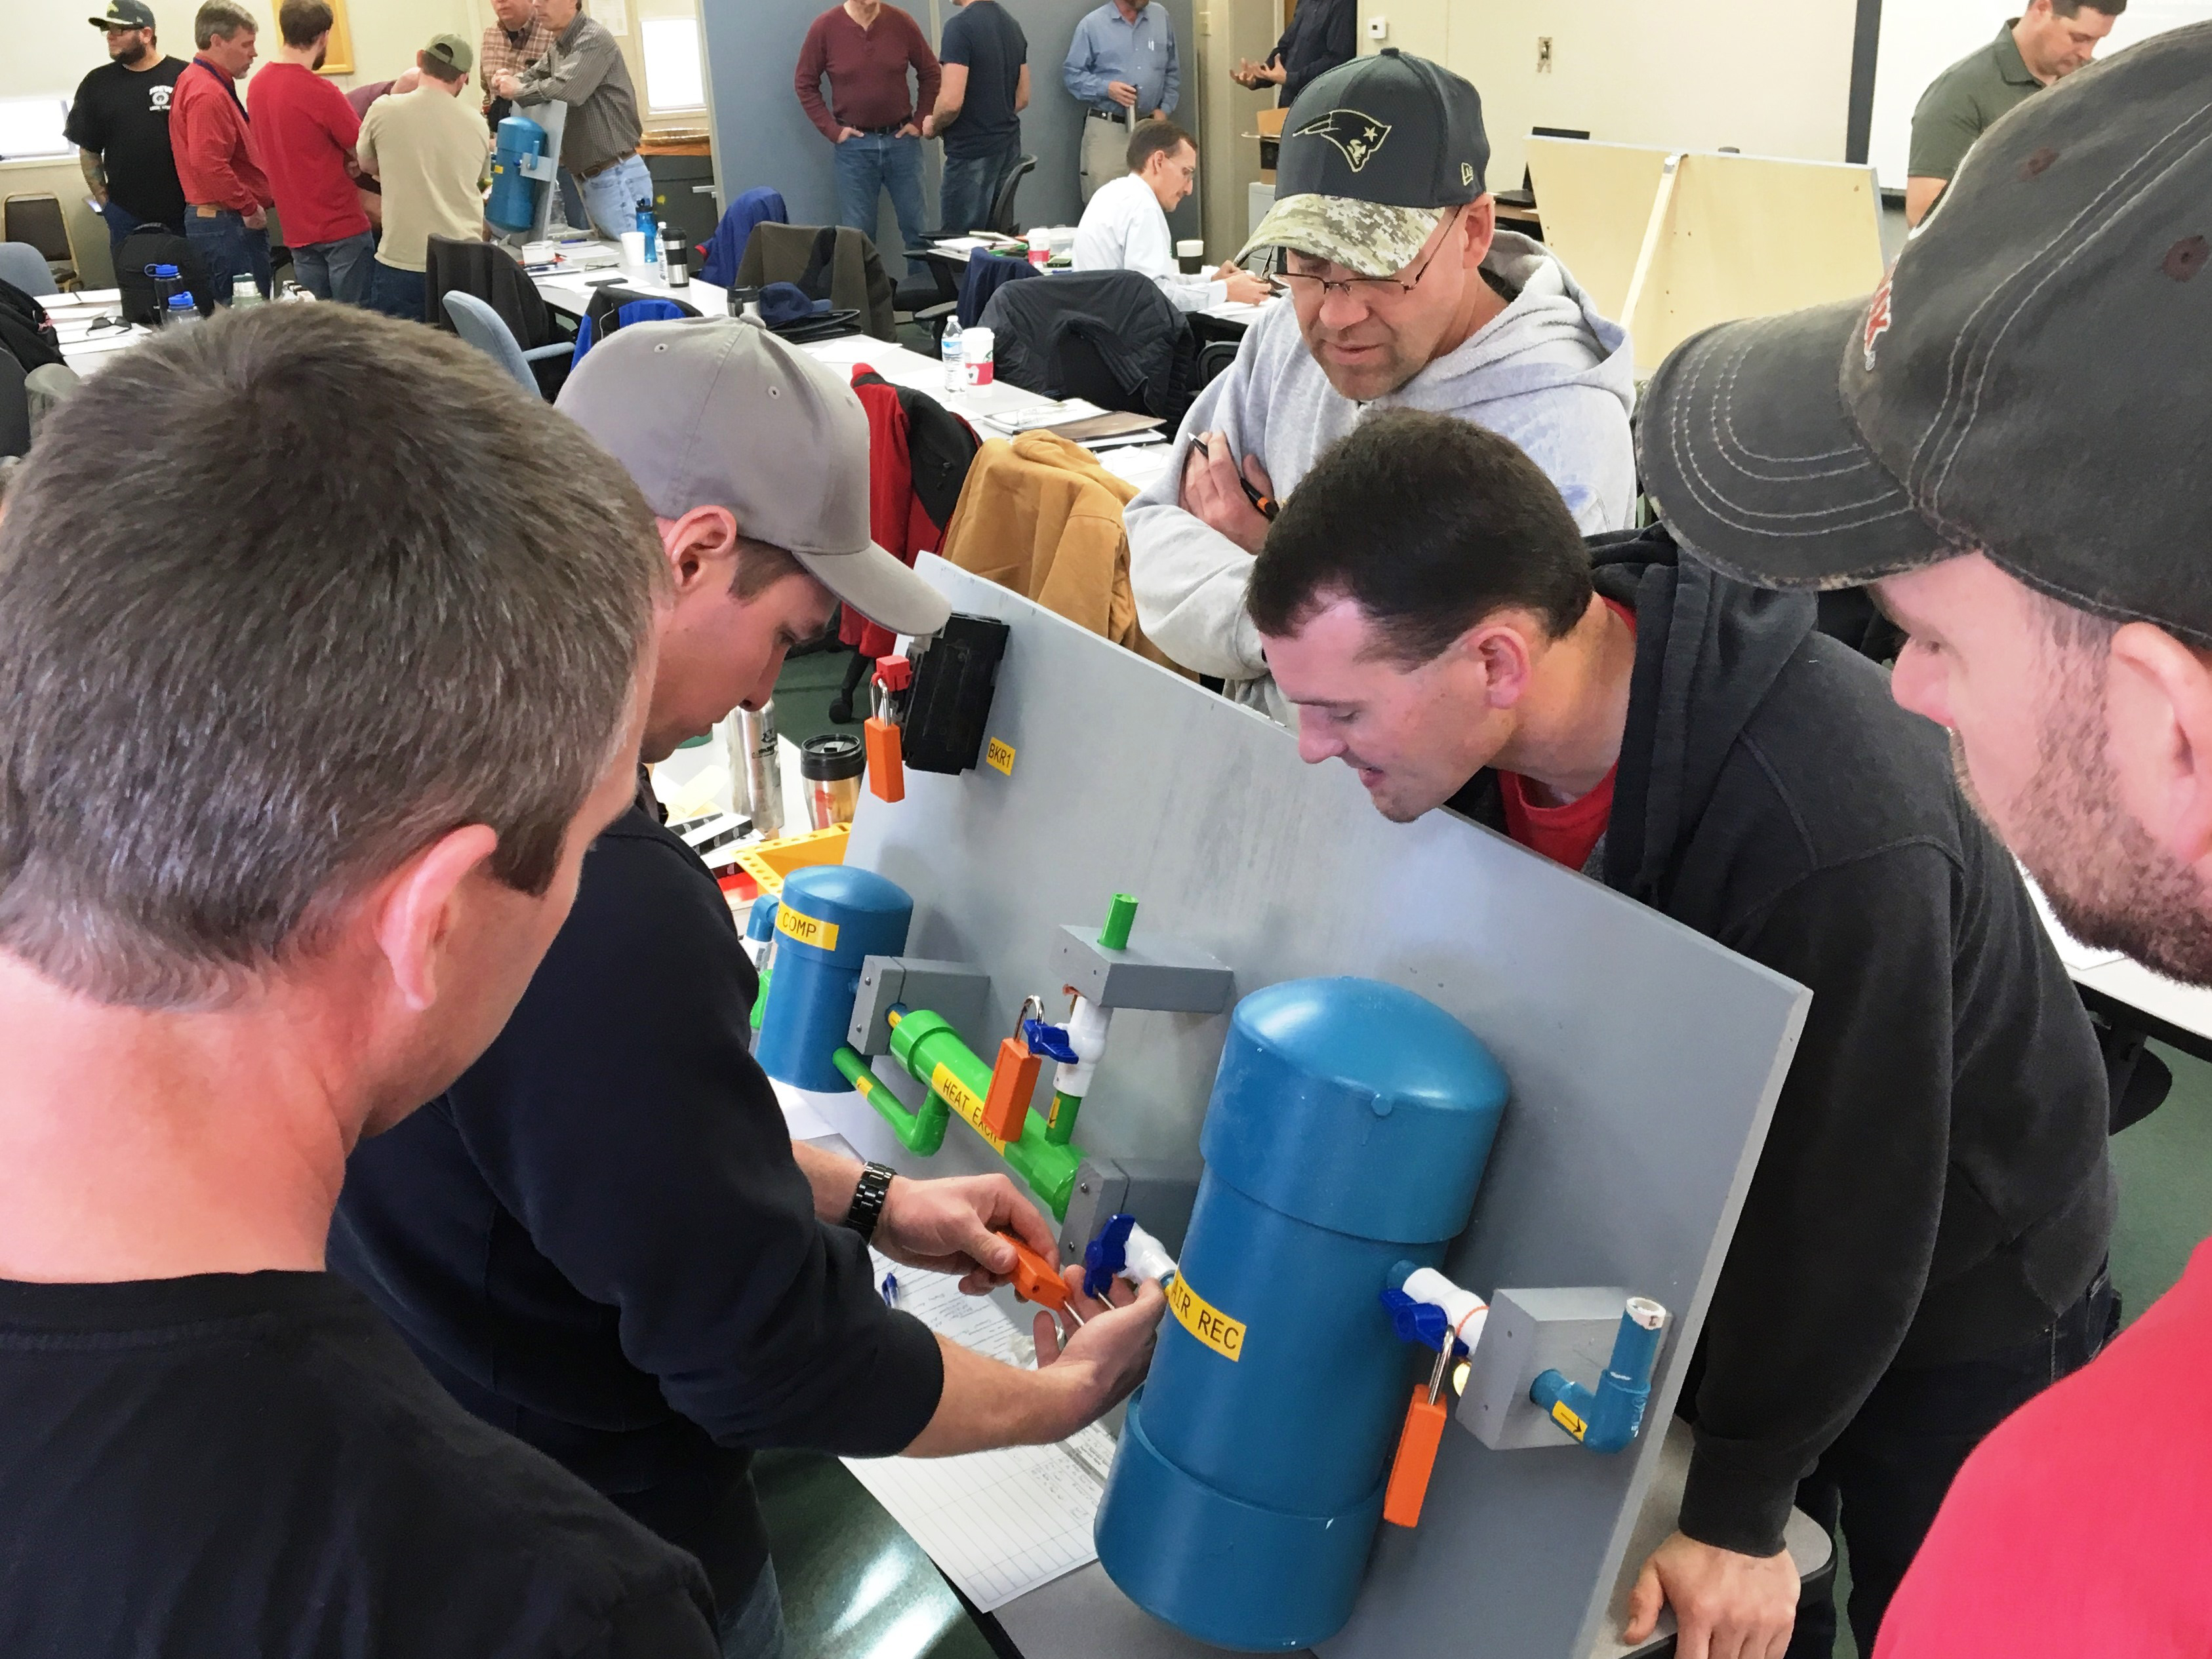 Employees from the Flatiron & Estes Power Plants, Jonathan Haywood, Trent Cherry, Steve Jagielo, and Allan Philips watch as Adam Northrup applies a lock to the model.